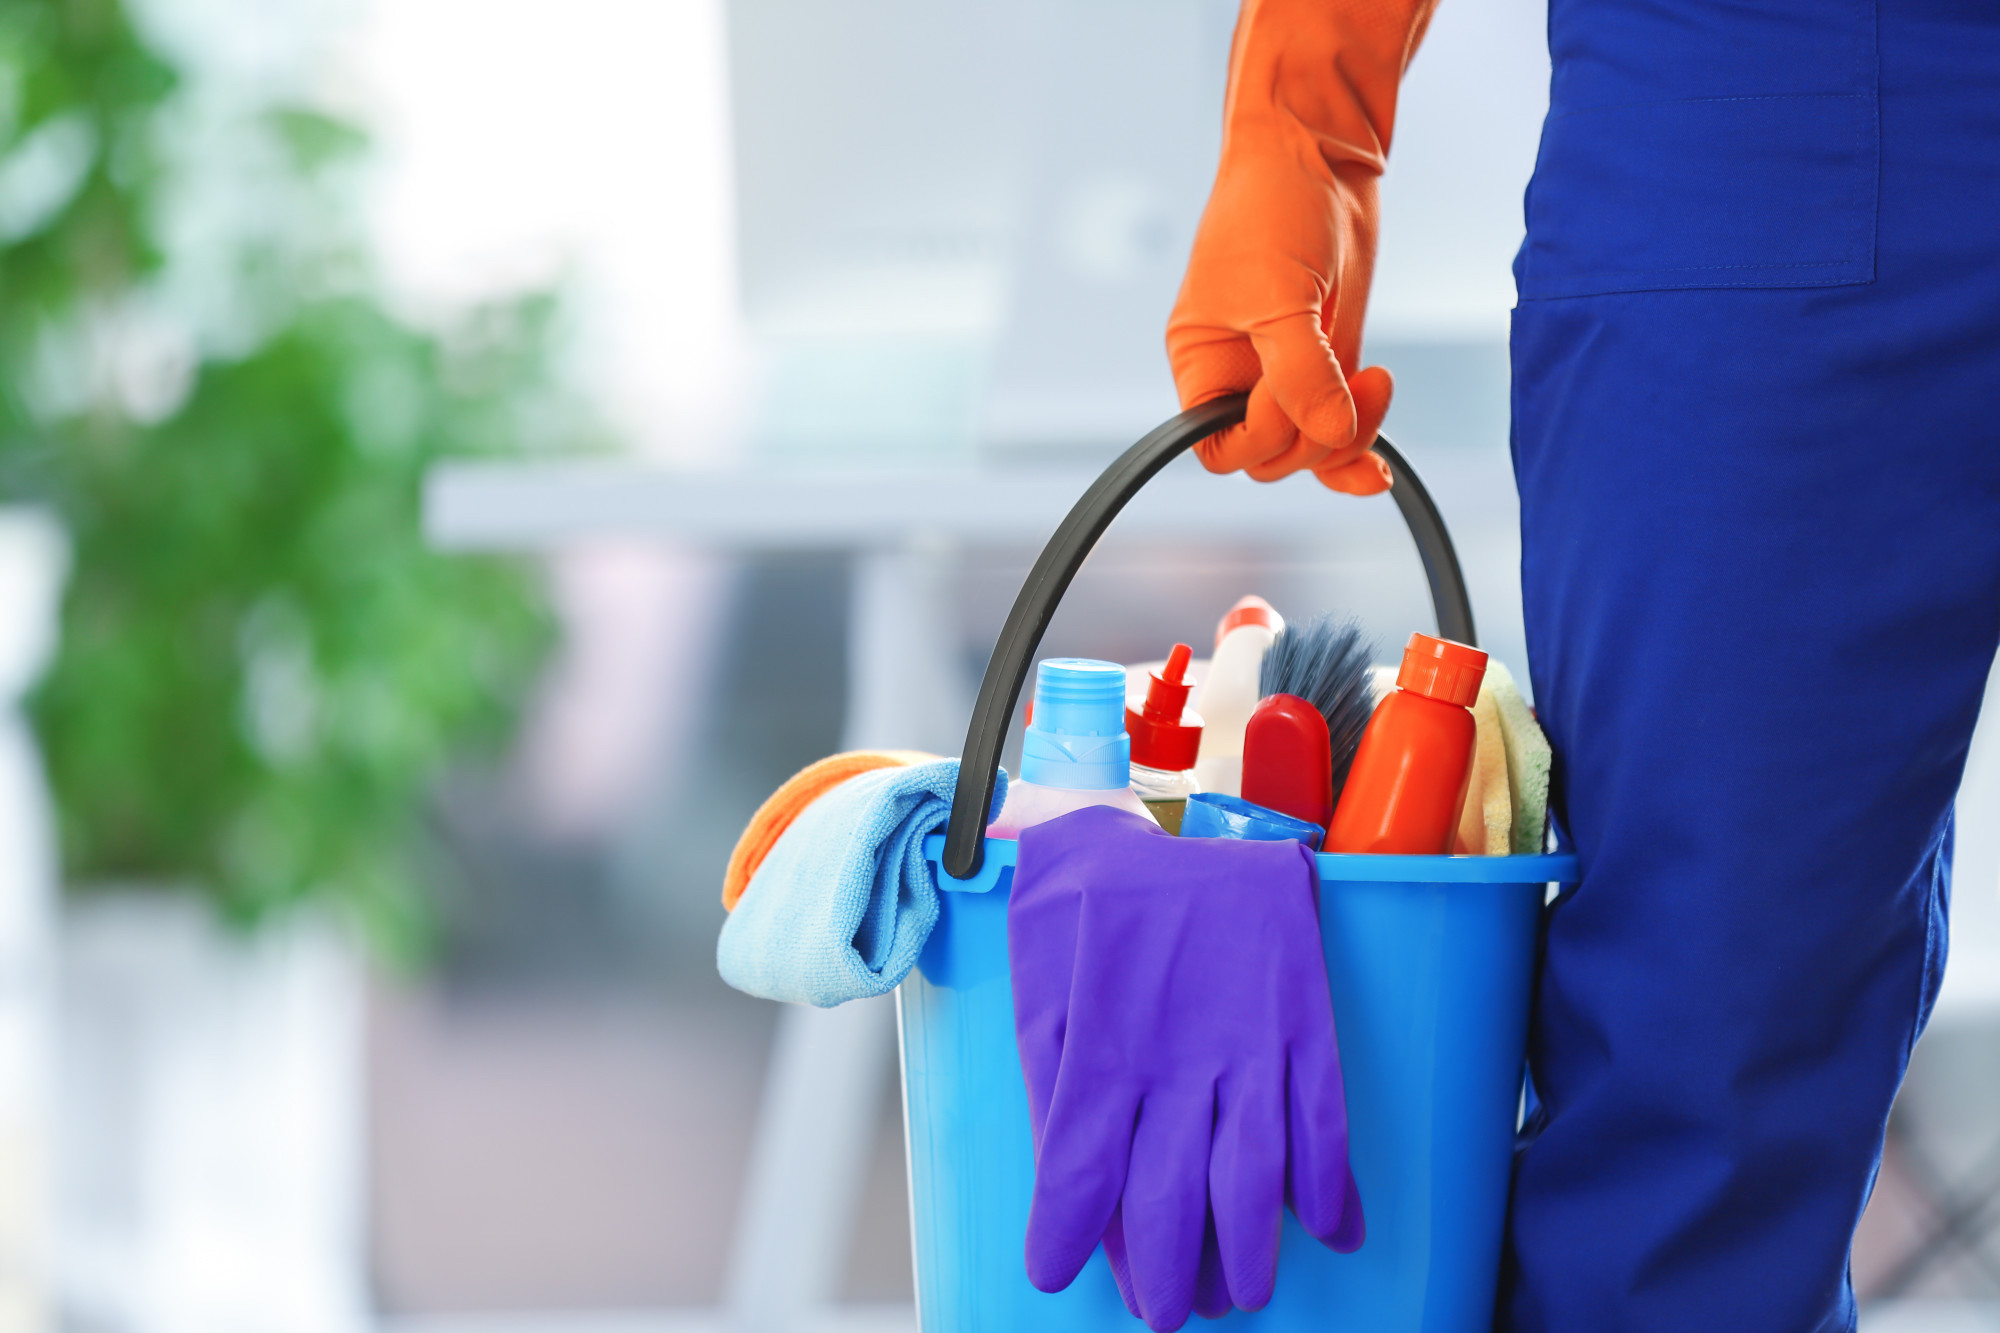 A person wearing blue overalls and orange gloves is holding a blue bucket filled with cleaning supplies. (illustrating tips for cleaning a house quickly and efficiently)